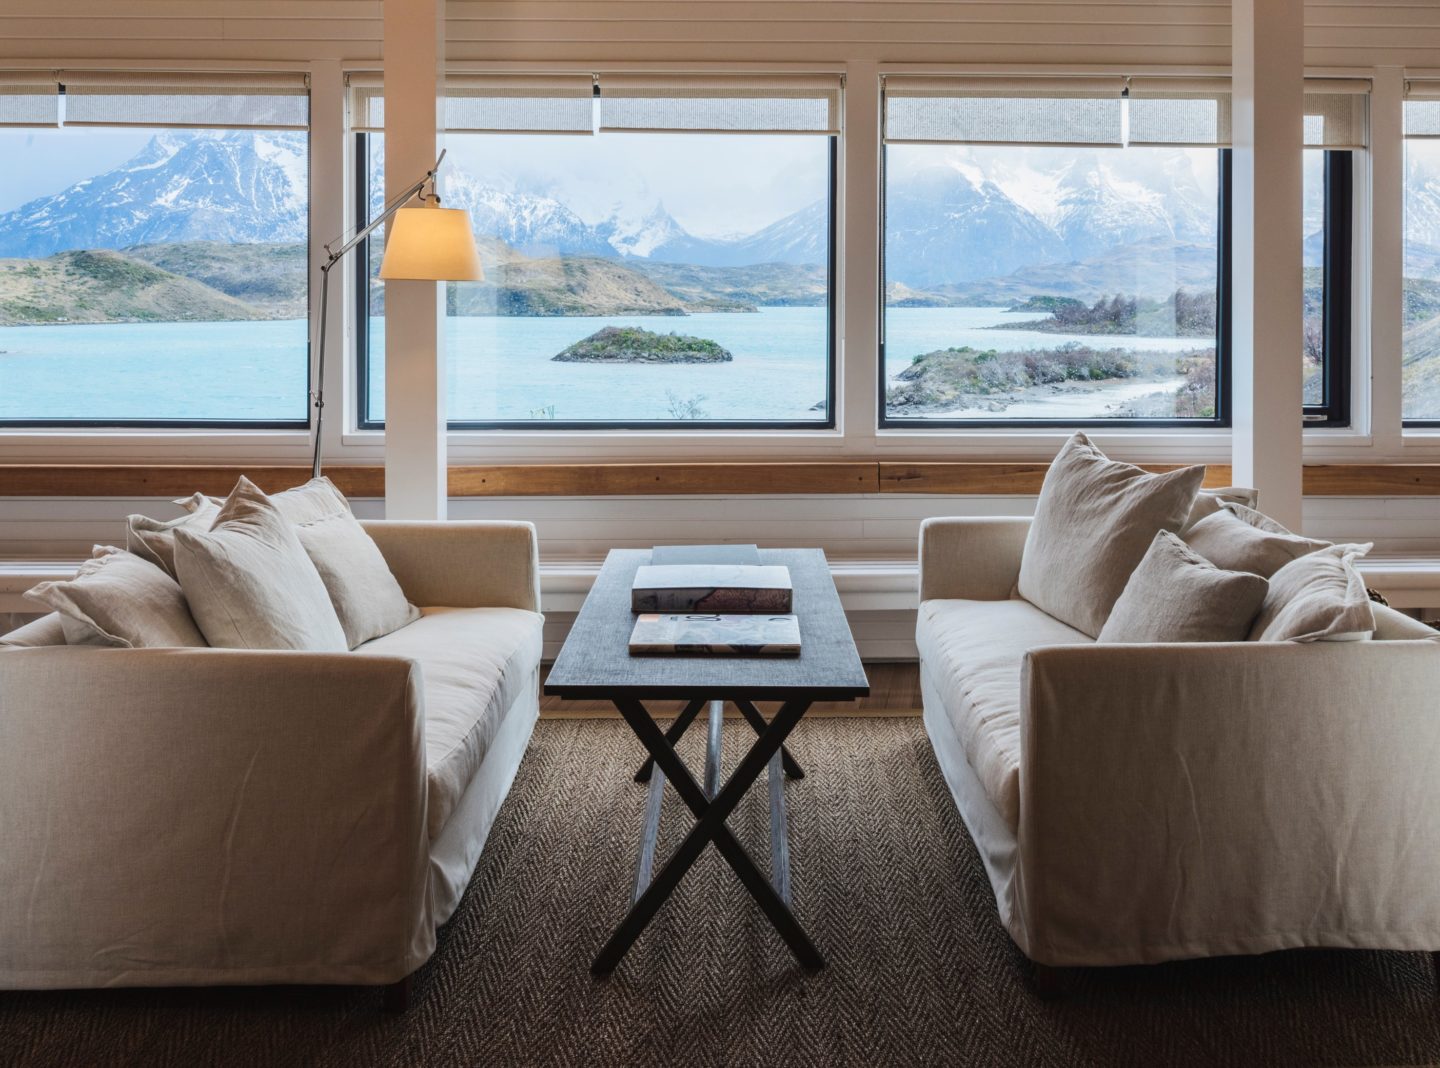 Spacious room overlooking a scenic view of a lake with mountains and greenery.